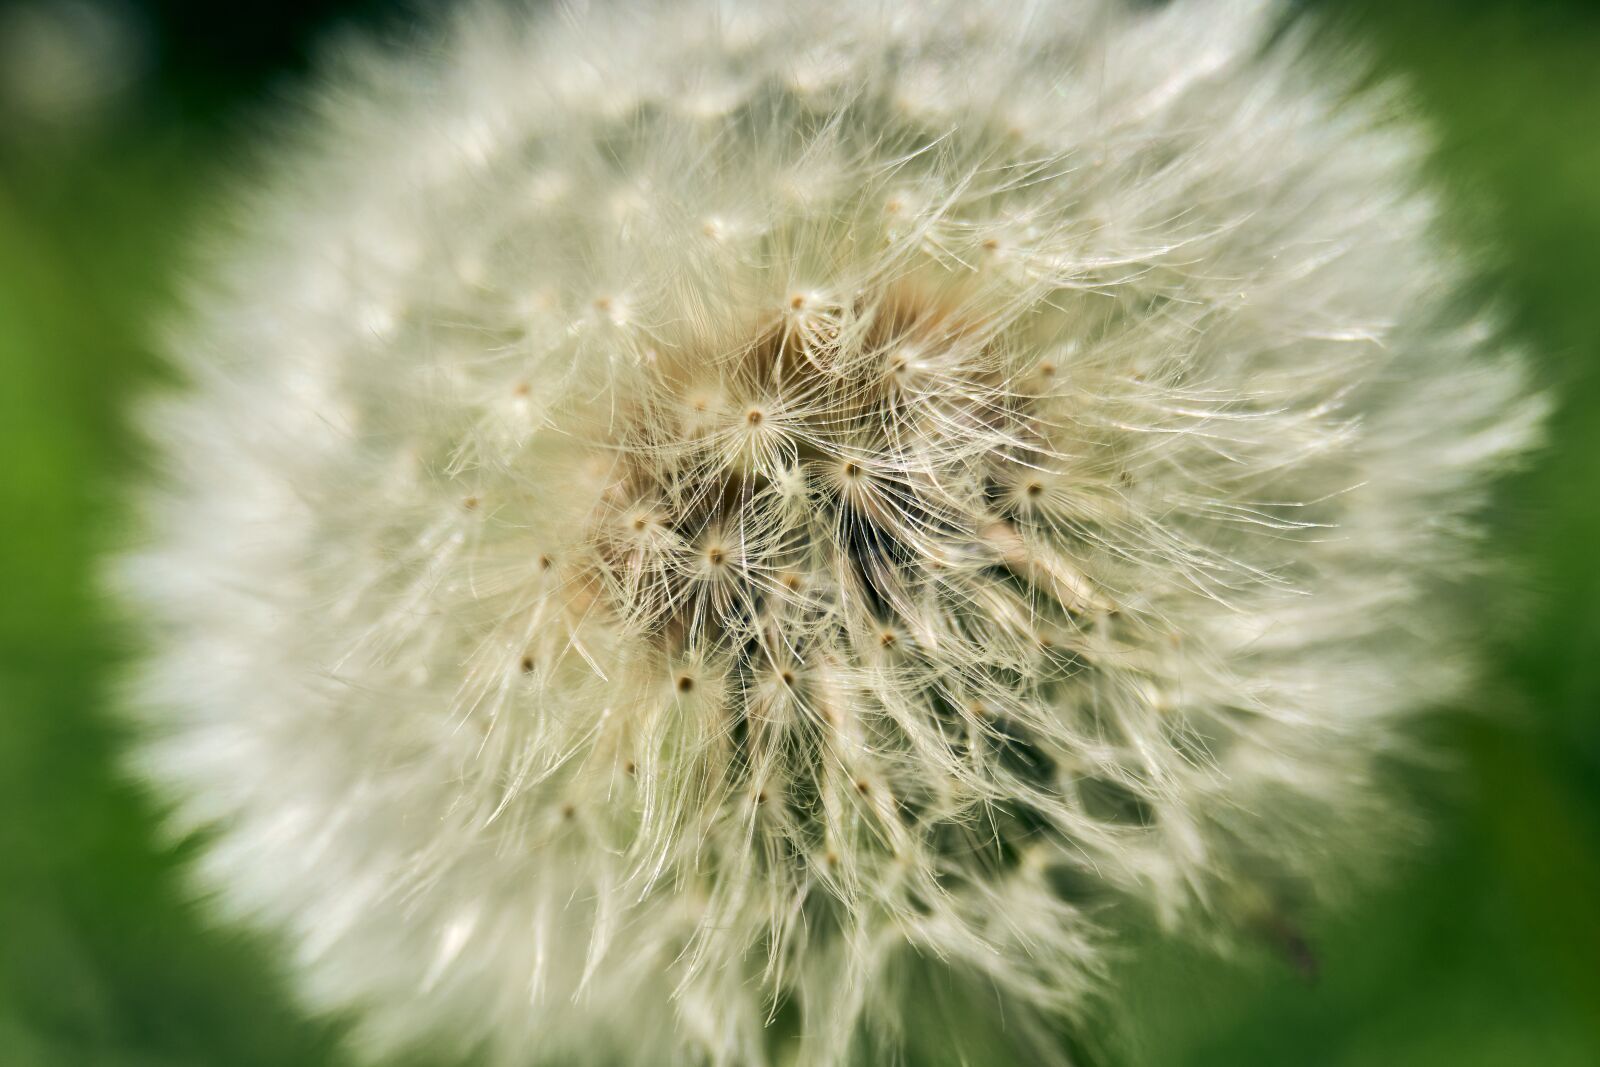 Sony E PZ 16-50 mm F3.5-5.6 OSS (SELP1650) sample photo. Dandelion, faded, flying seeds photography